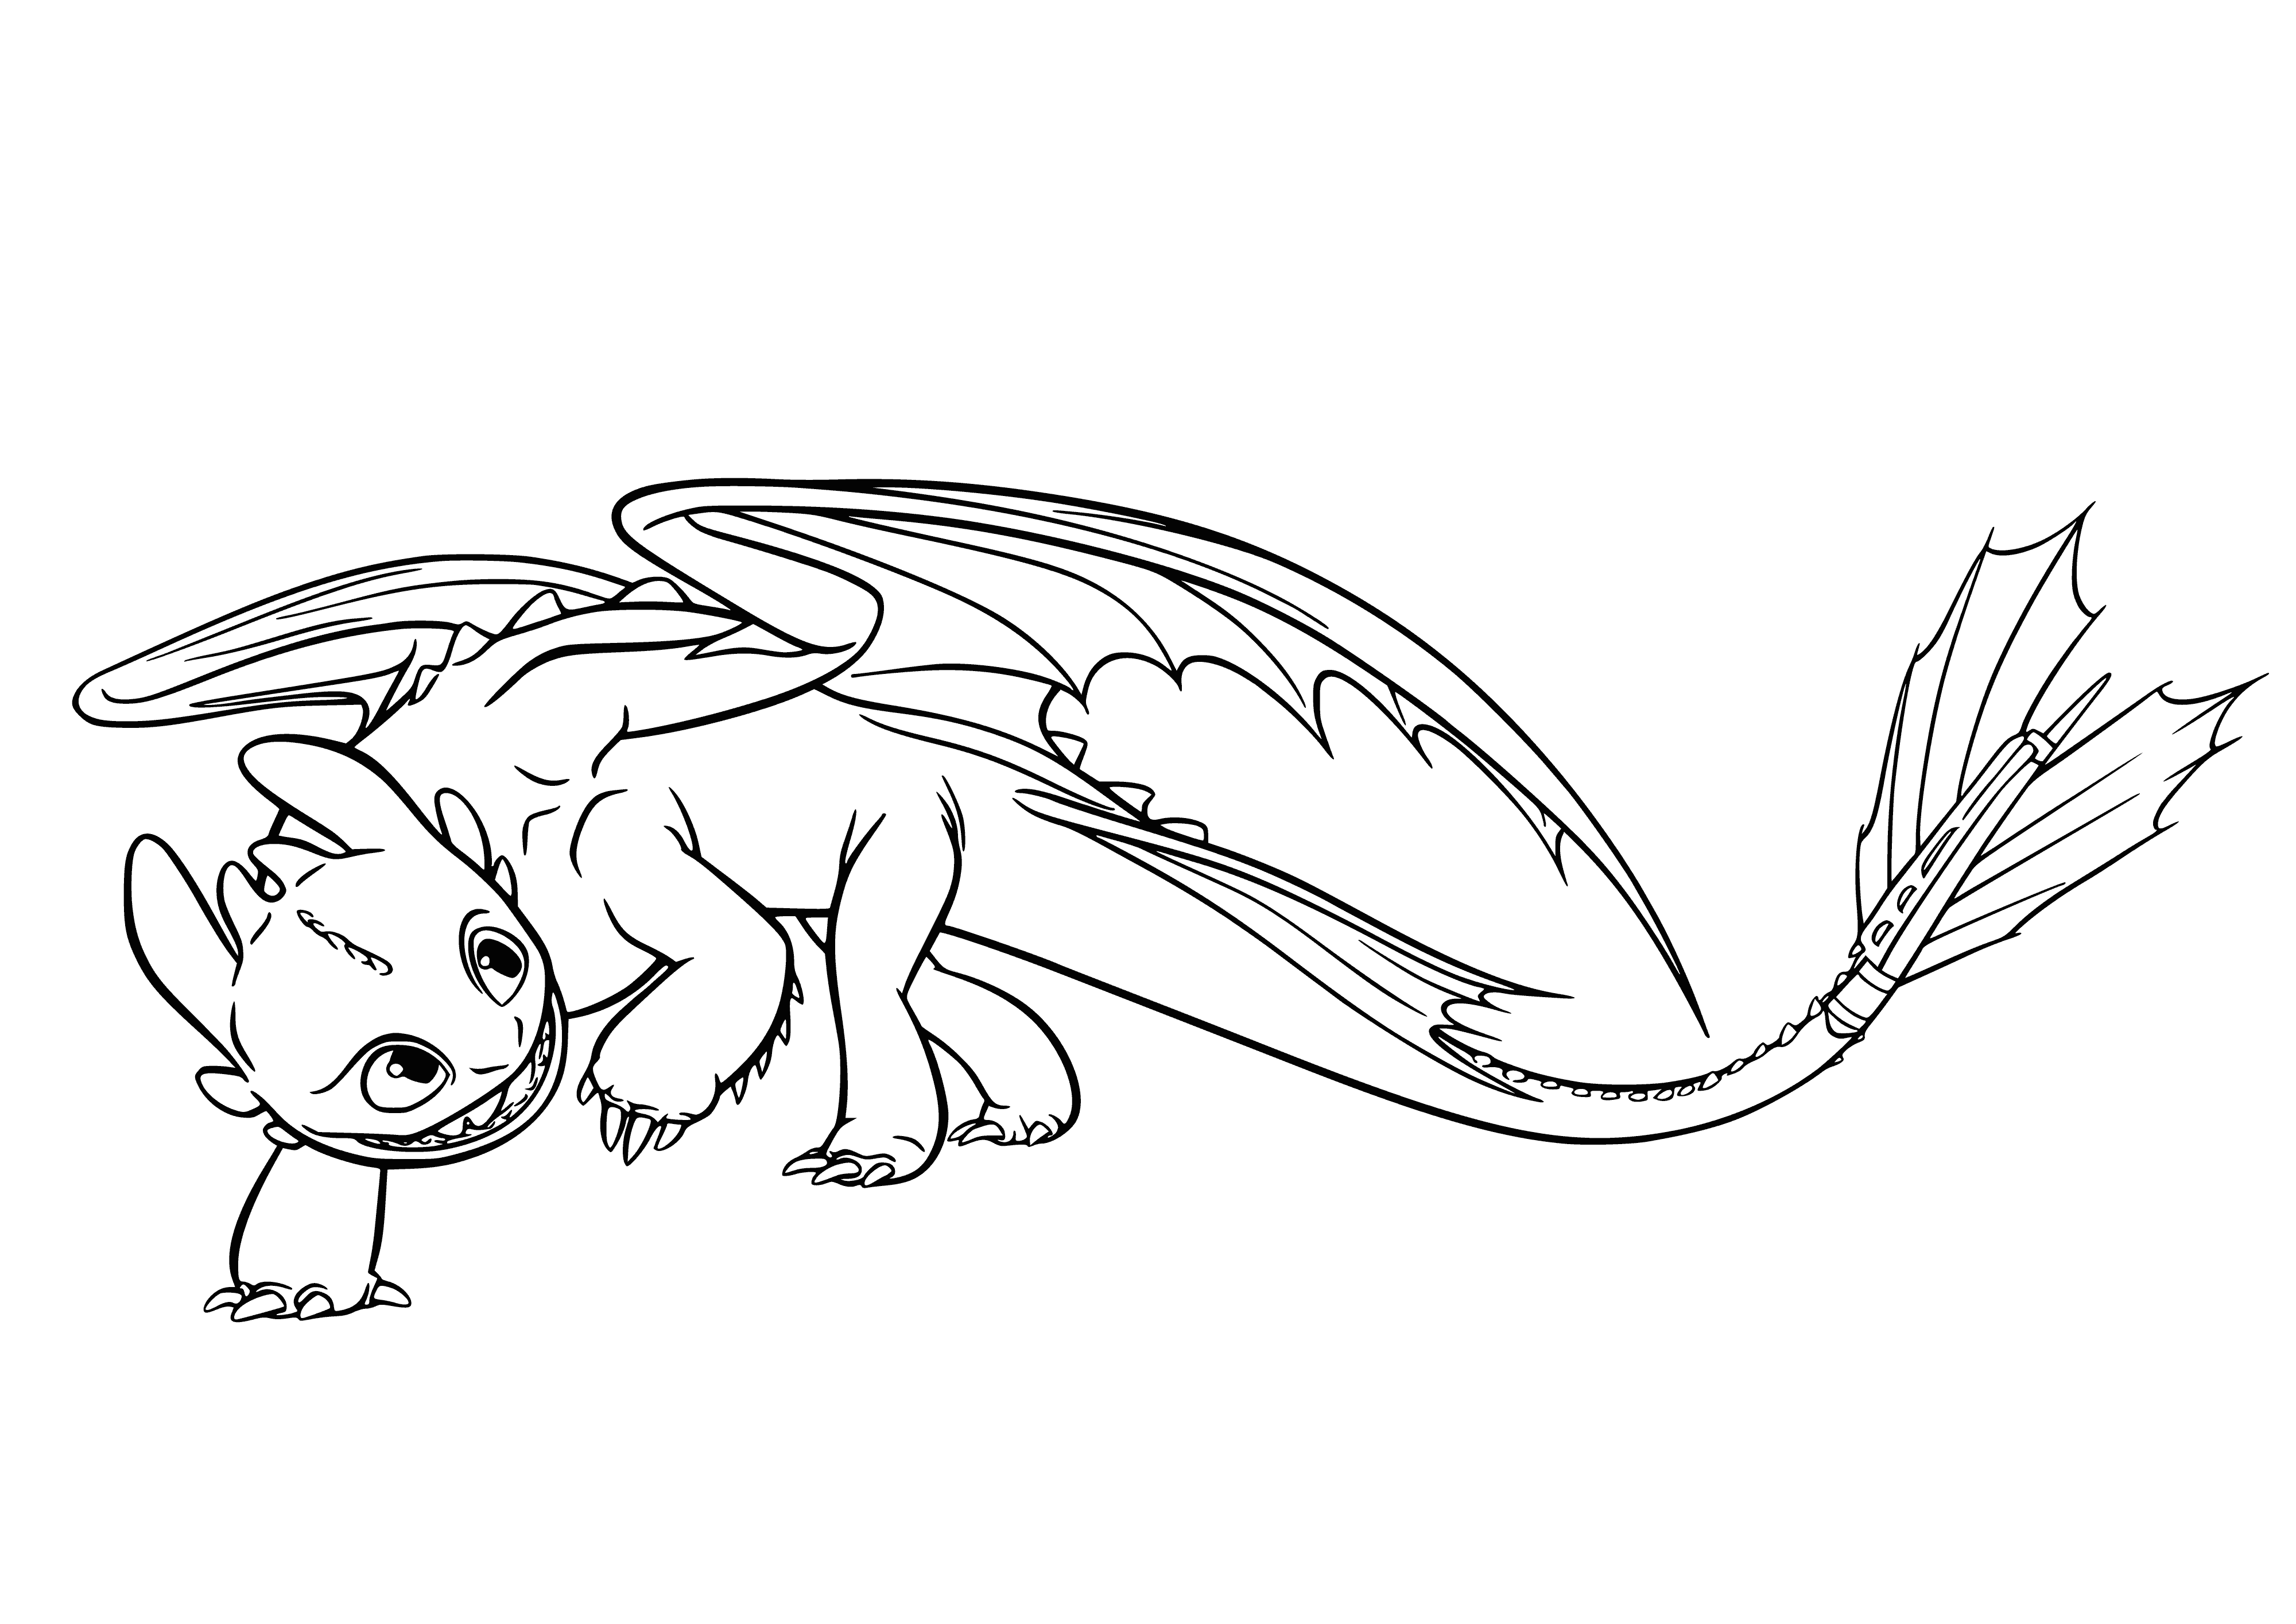 Night fury coloring page